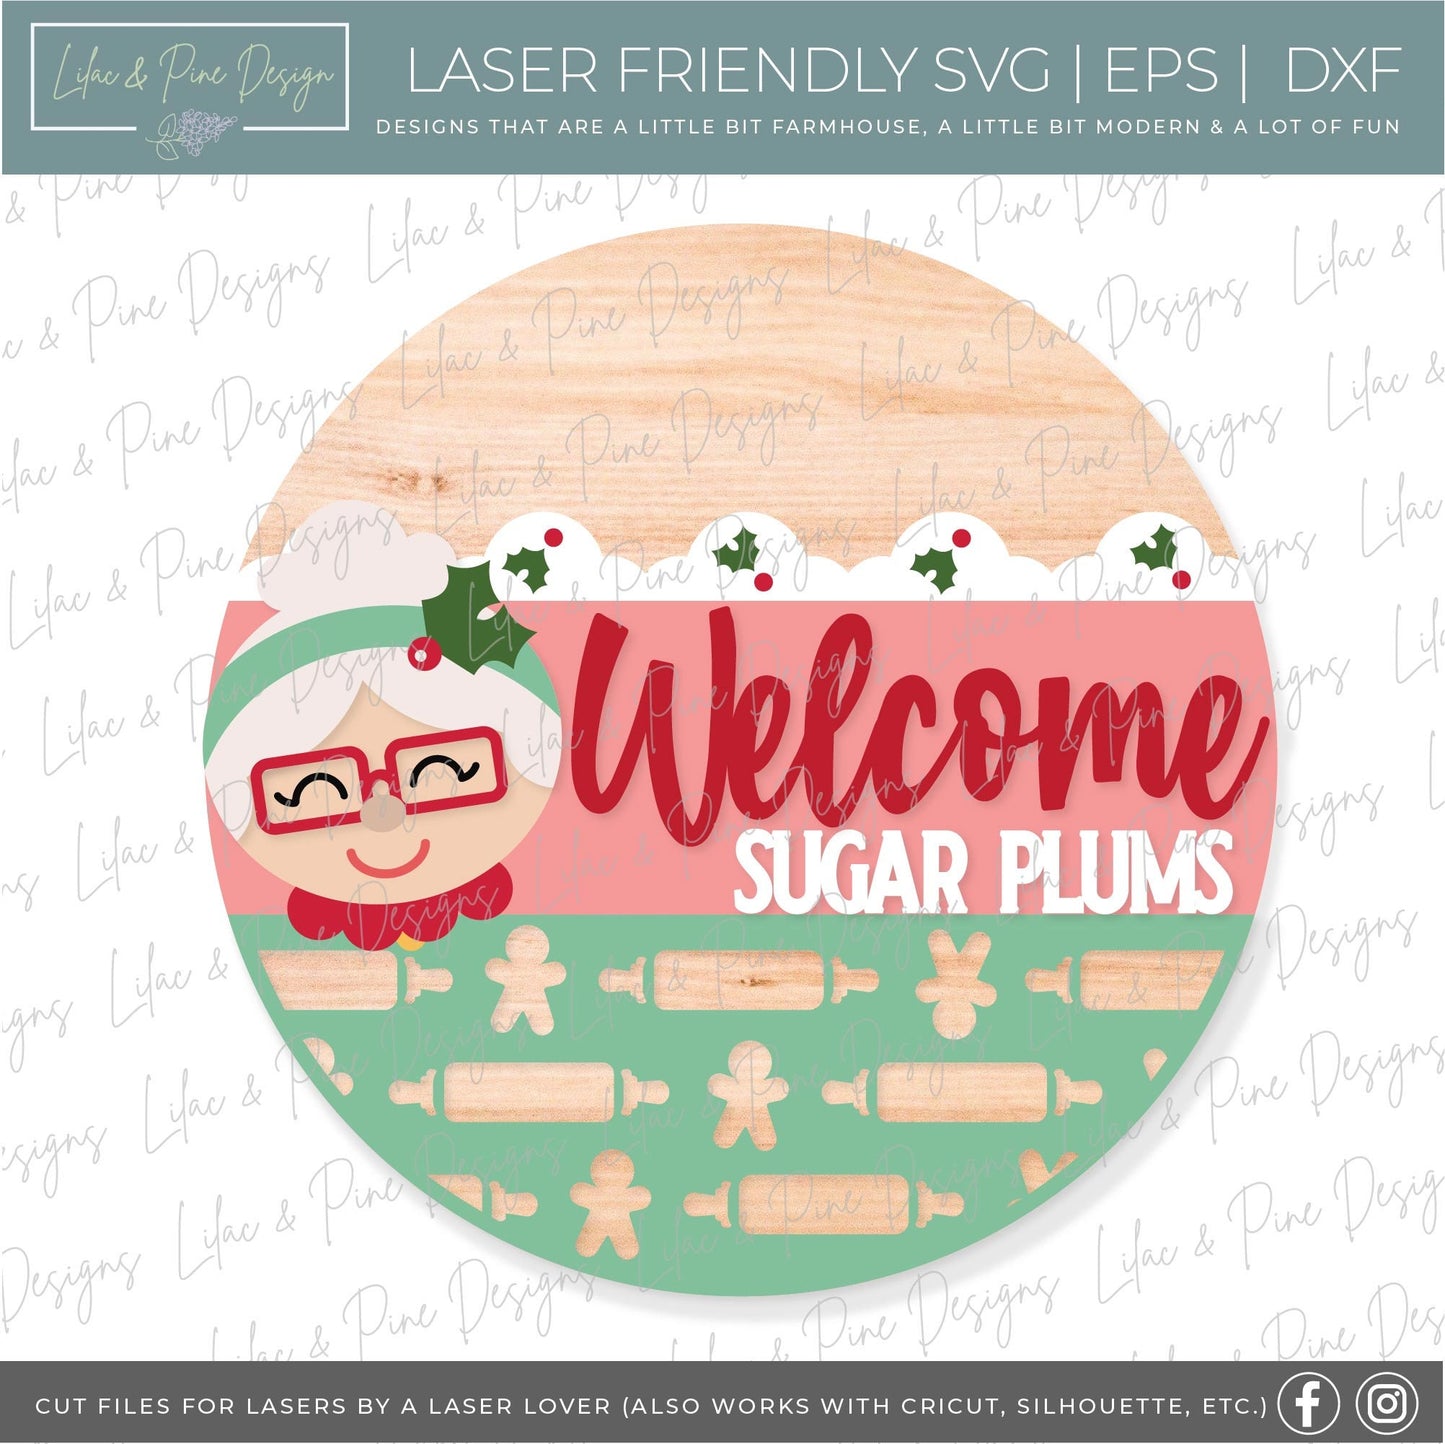 Welcome Sugar Plums SVG, Mrs Claus welcome sign SVG, Christmas door hanger SVG, Christmas welcome sign svg, Glowforge Svg, laser cut file